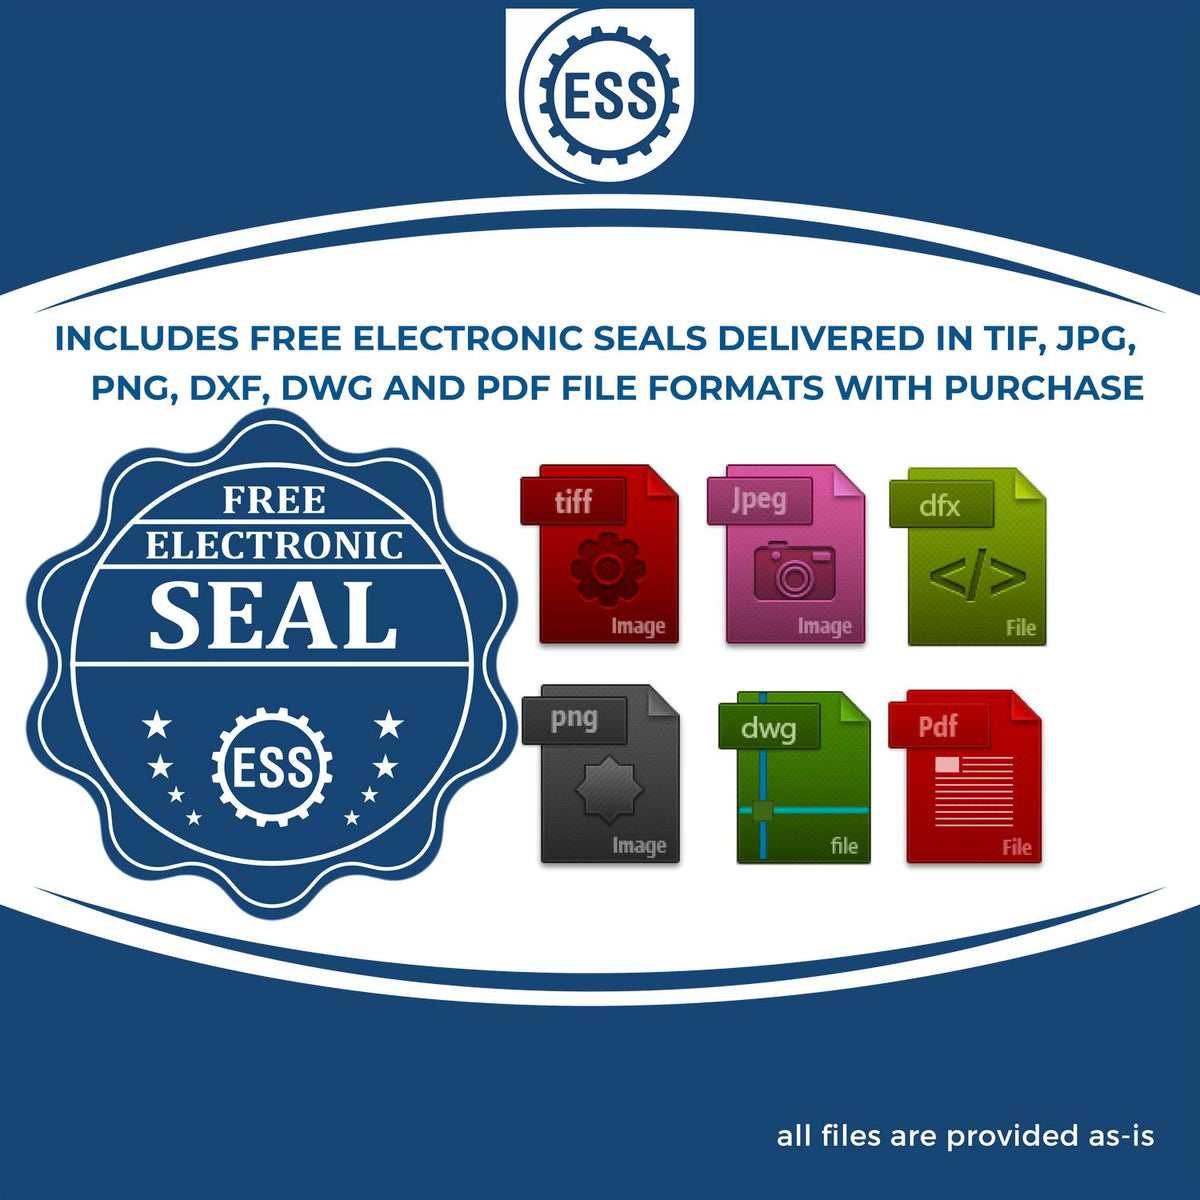 An infographic for the free electronic seal for the Slim Pre-Inked Missouri Professional Geologist Seal Stamp illustrating the different file type icons such as DXF, DWG, TIF, JPG and PNG.